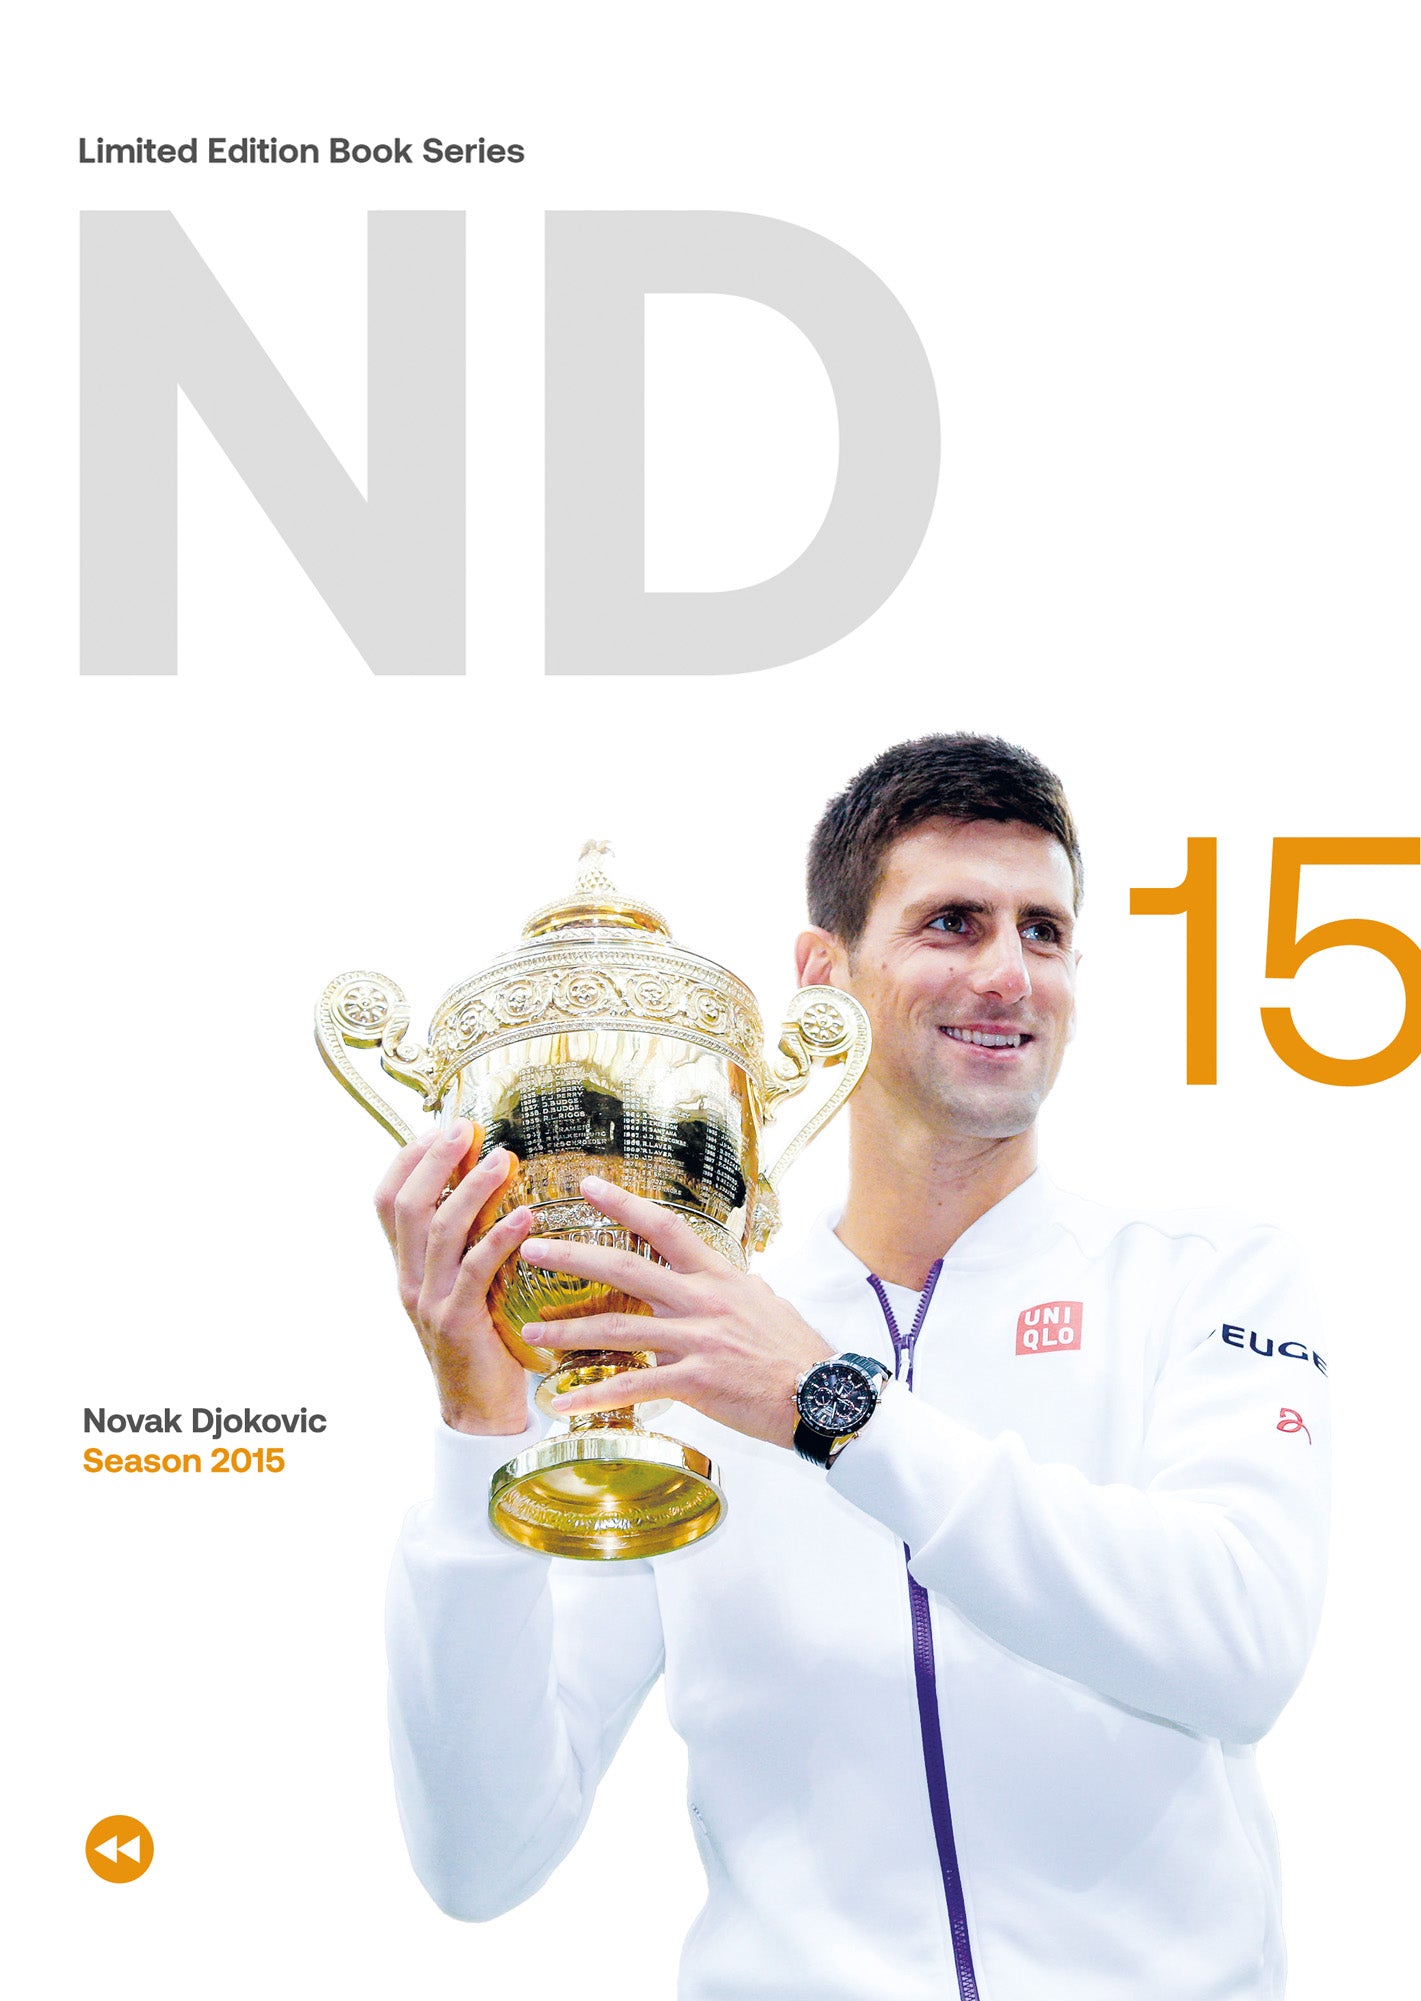 Novak Djokovic 2015: only available in sets.